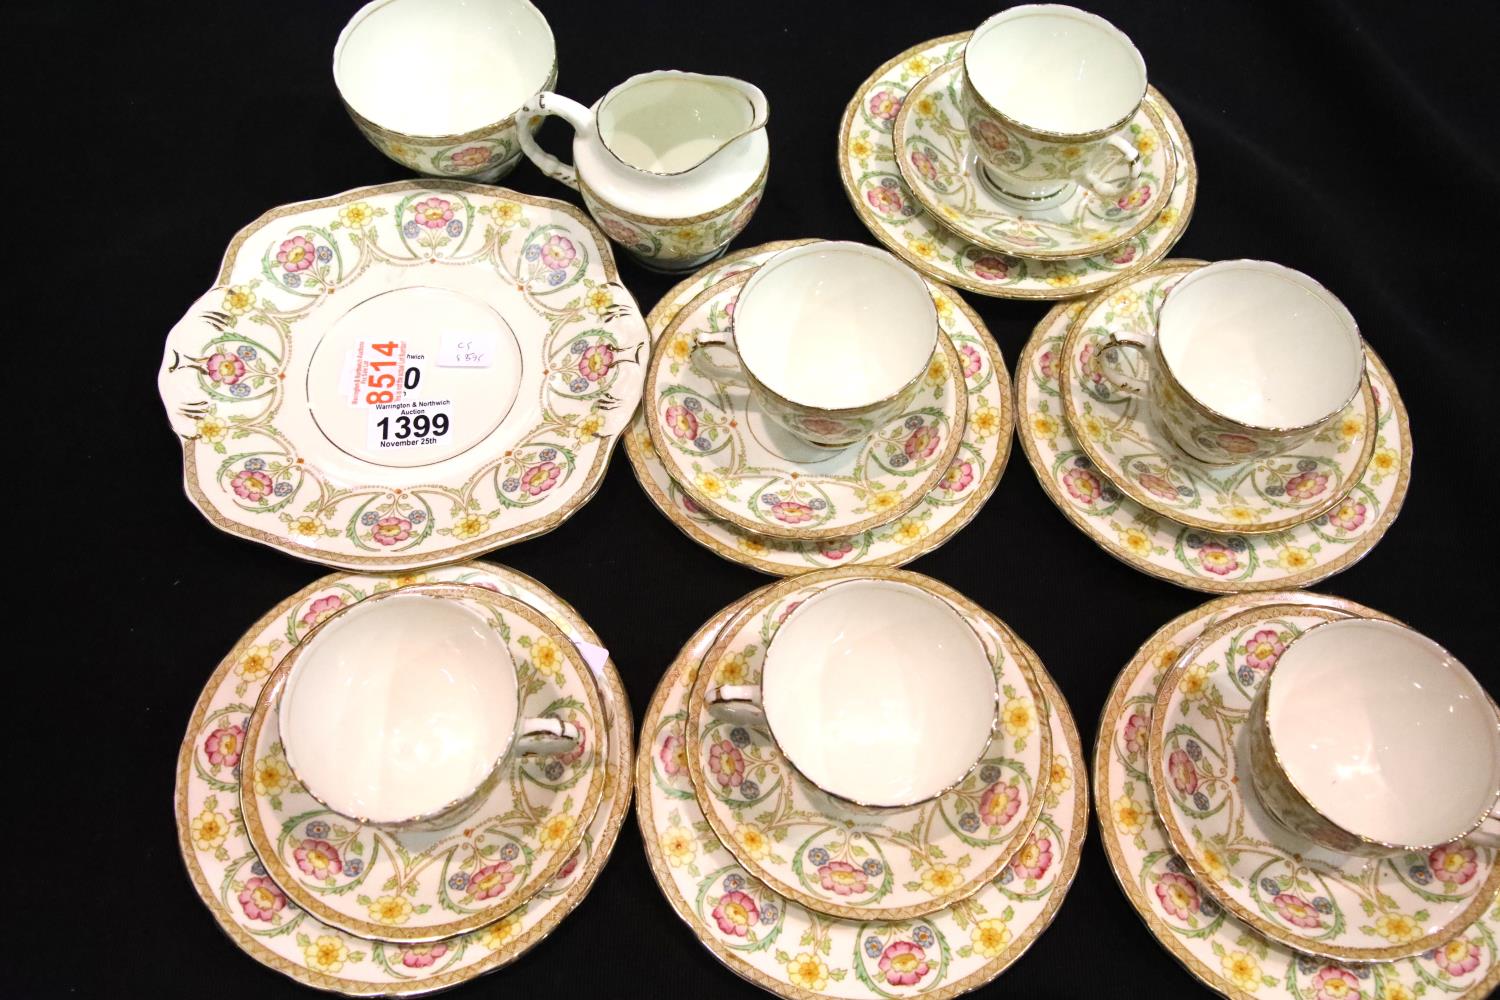 Sutherland China 21 piece tea service. Not available for in-house P&P